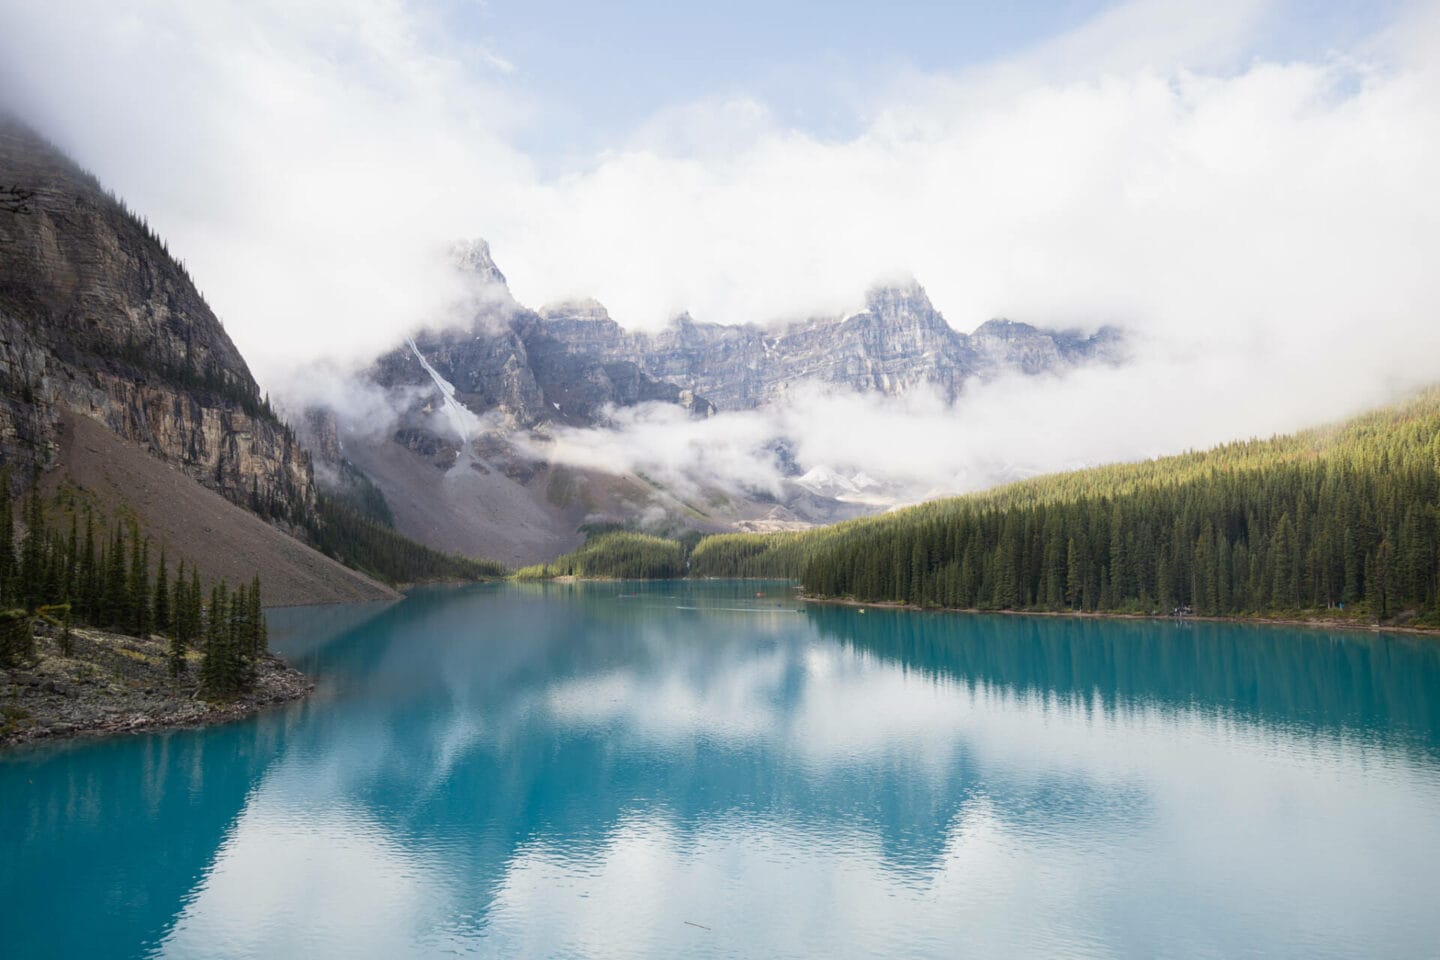 How to see Banff without a car